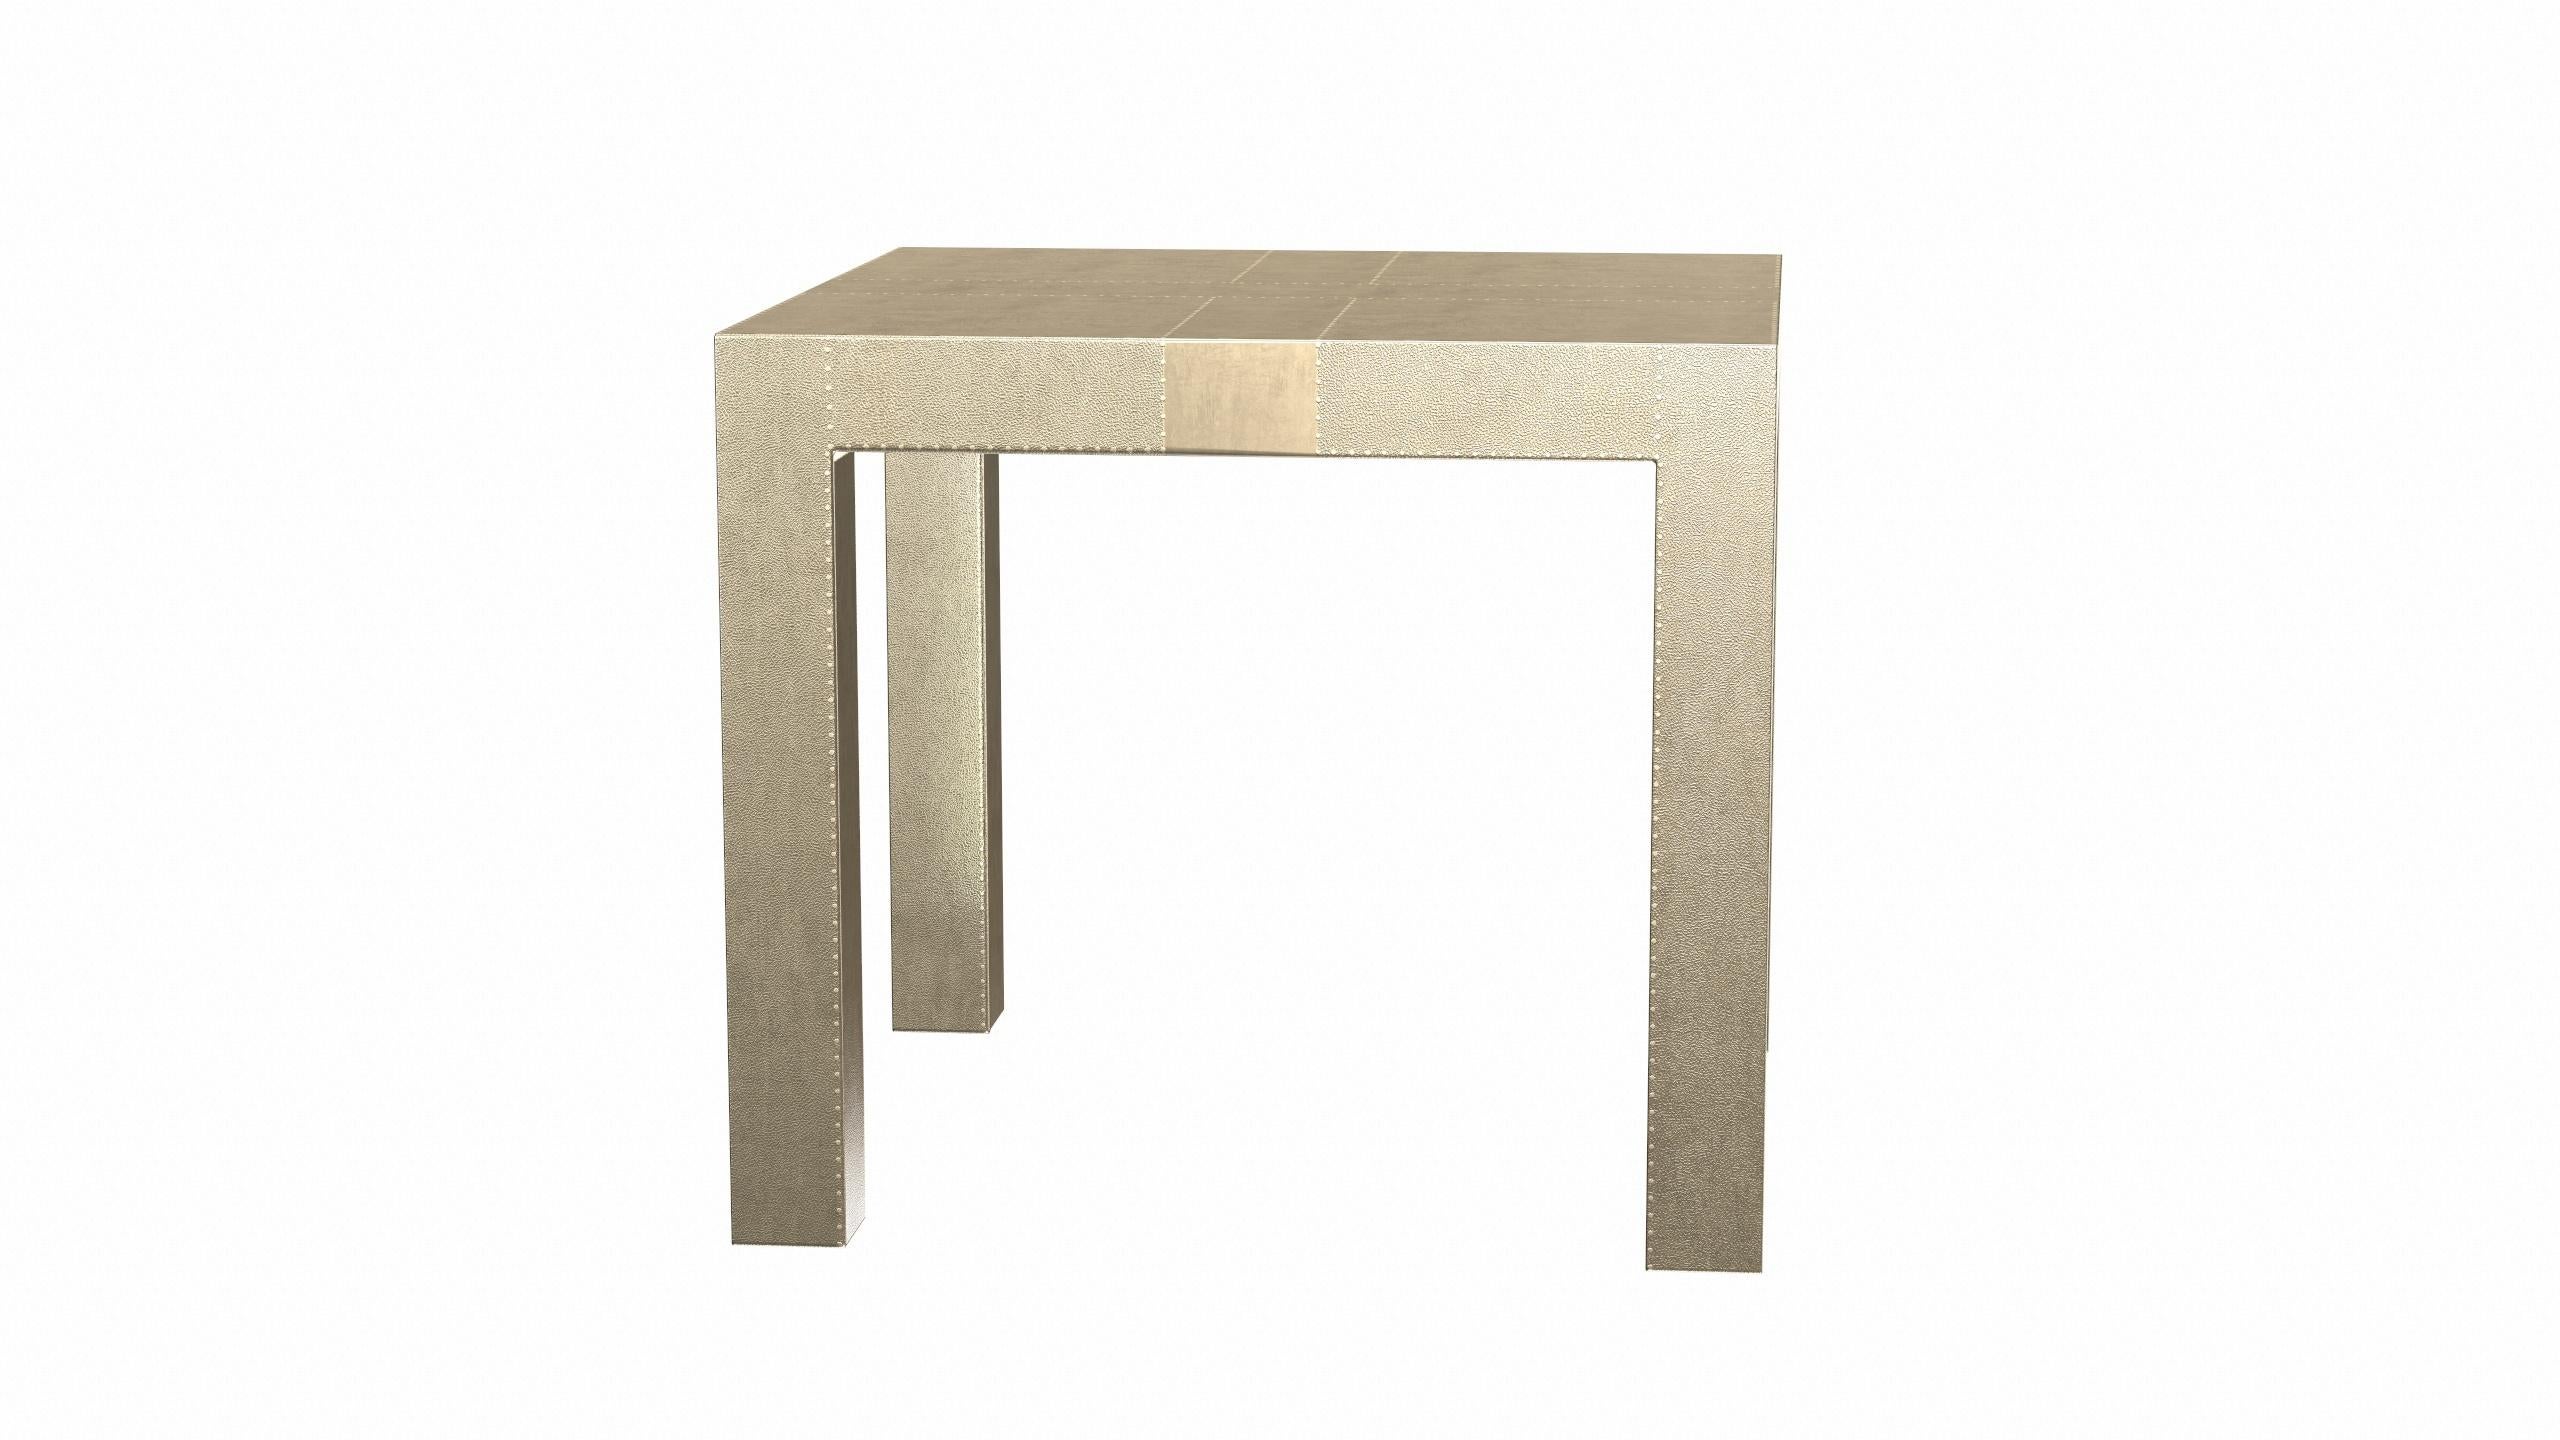 Patinated Art Deco Square Drink Center Tables Fine Hammered Brass by Alison Spear  For Sale